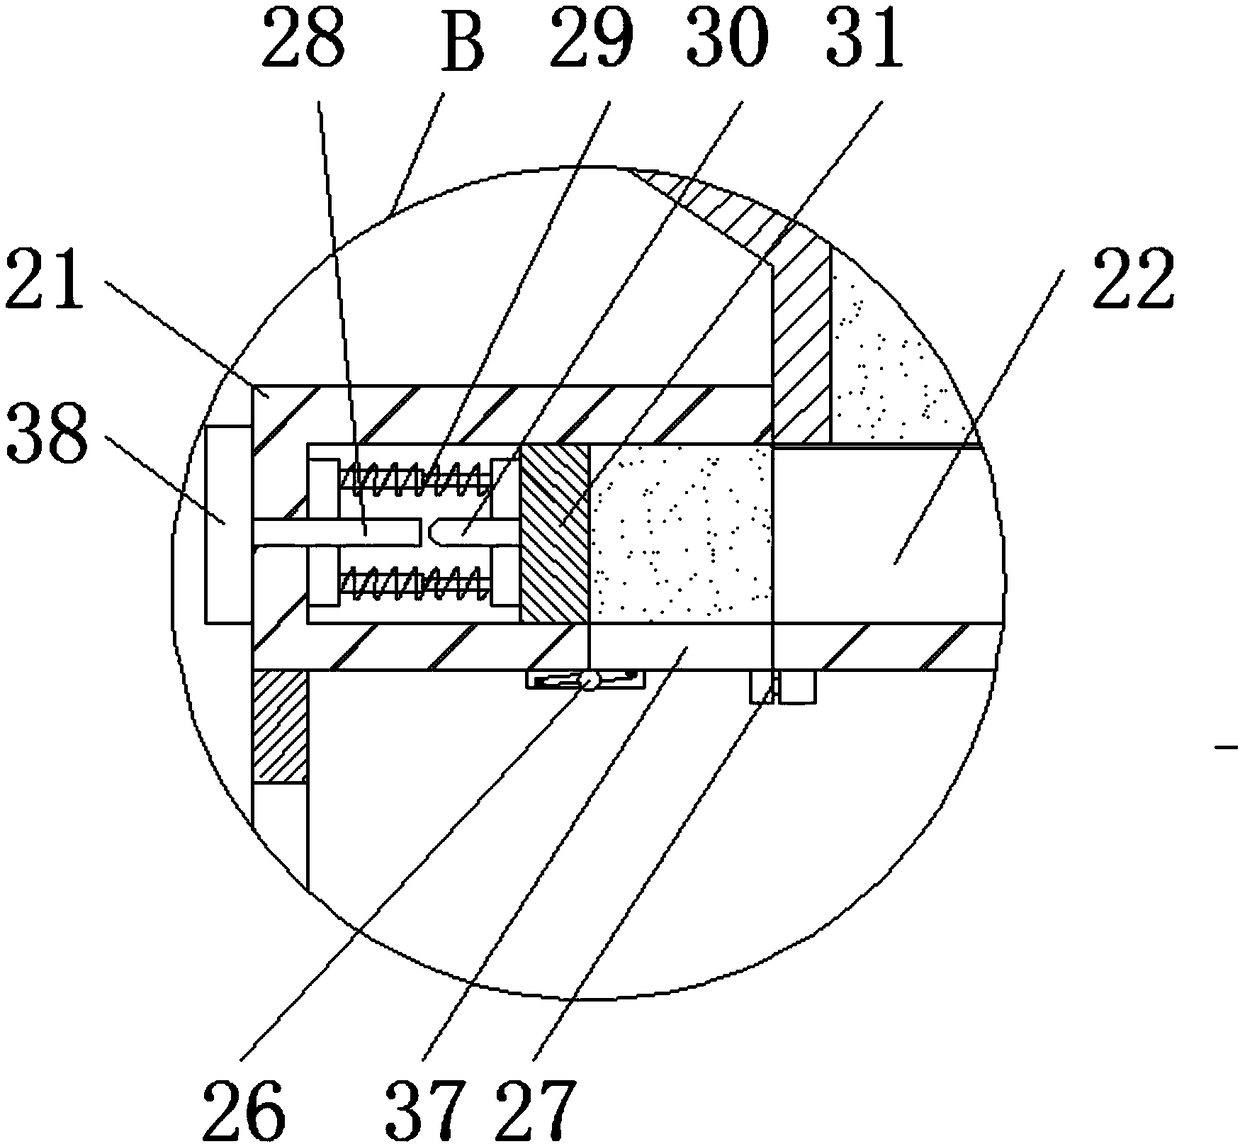 Treatment device for building material processing wood chips